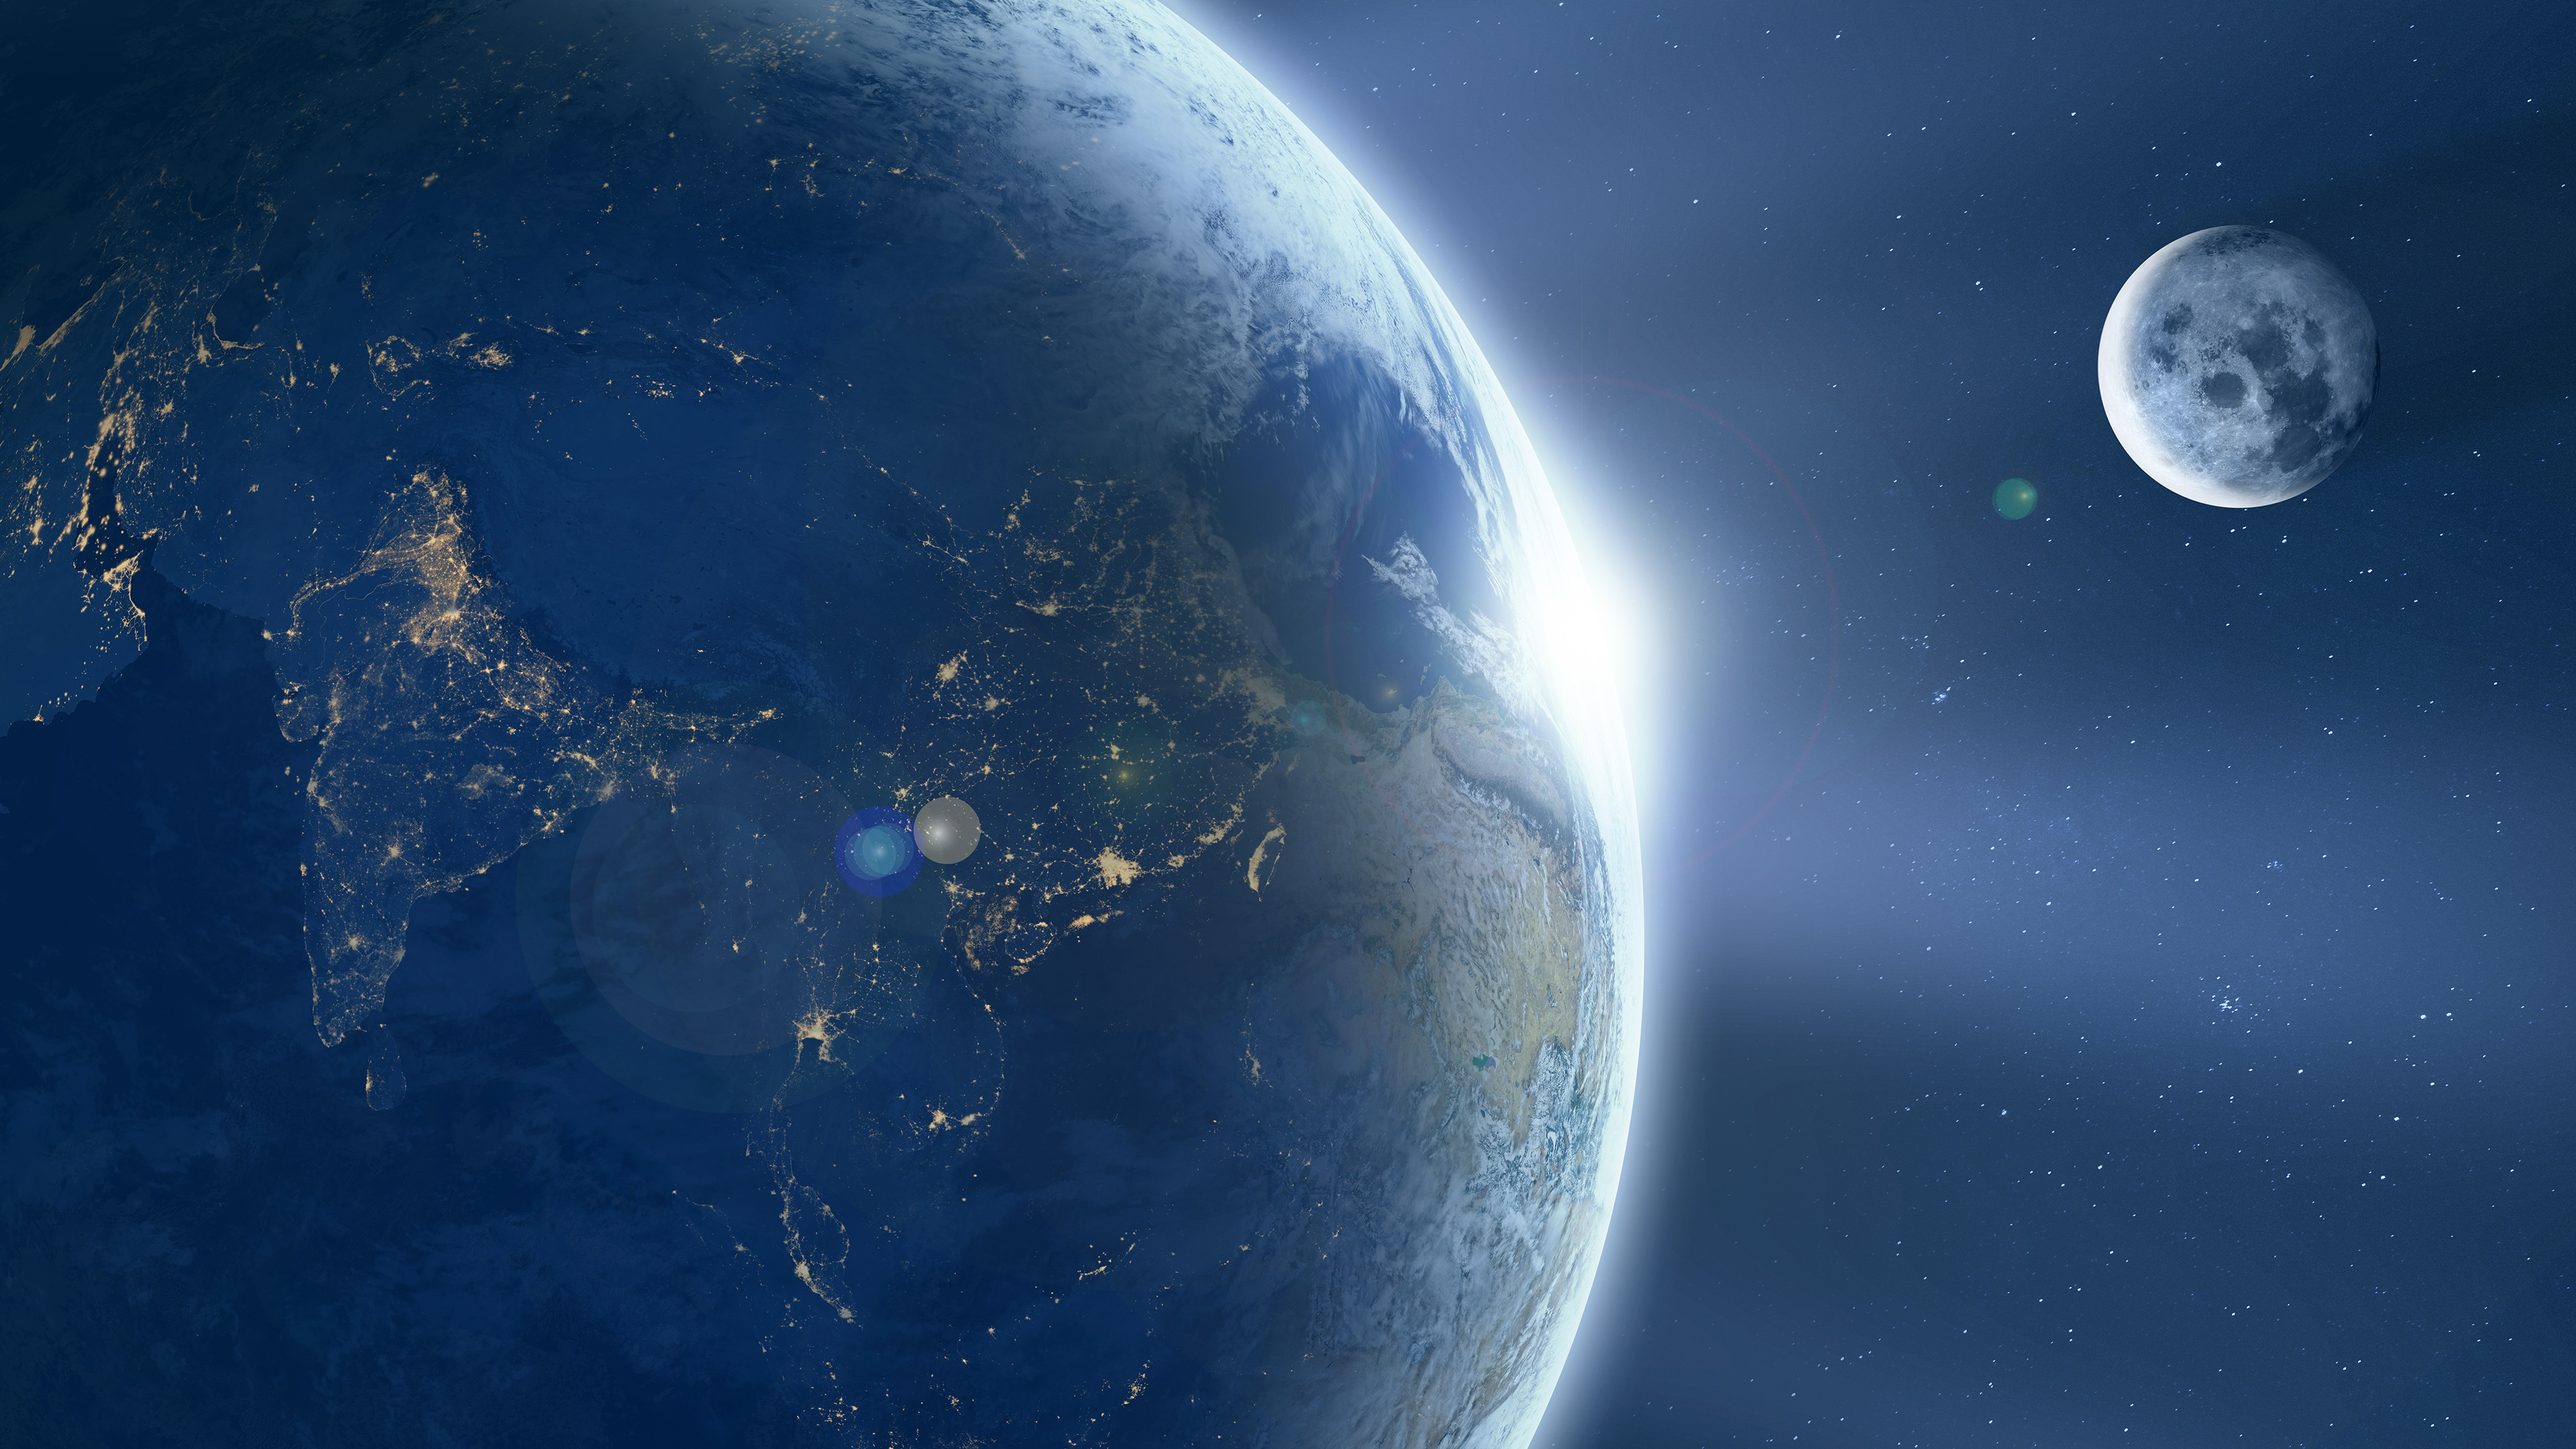 3840x2160 Earth From Space 4K Wallpaper Download Earth From Space 4K Wallpaper  Download